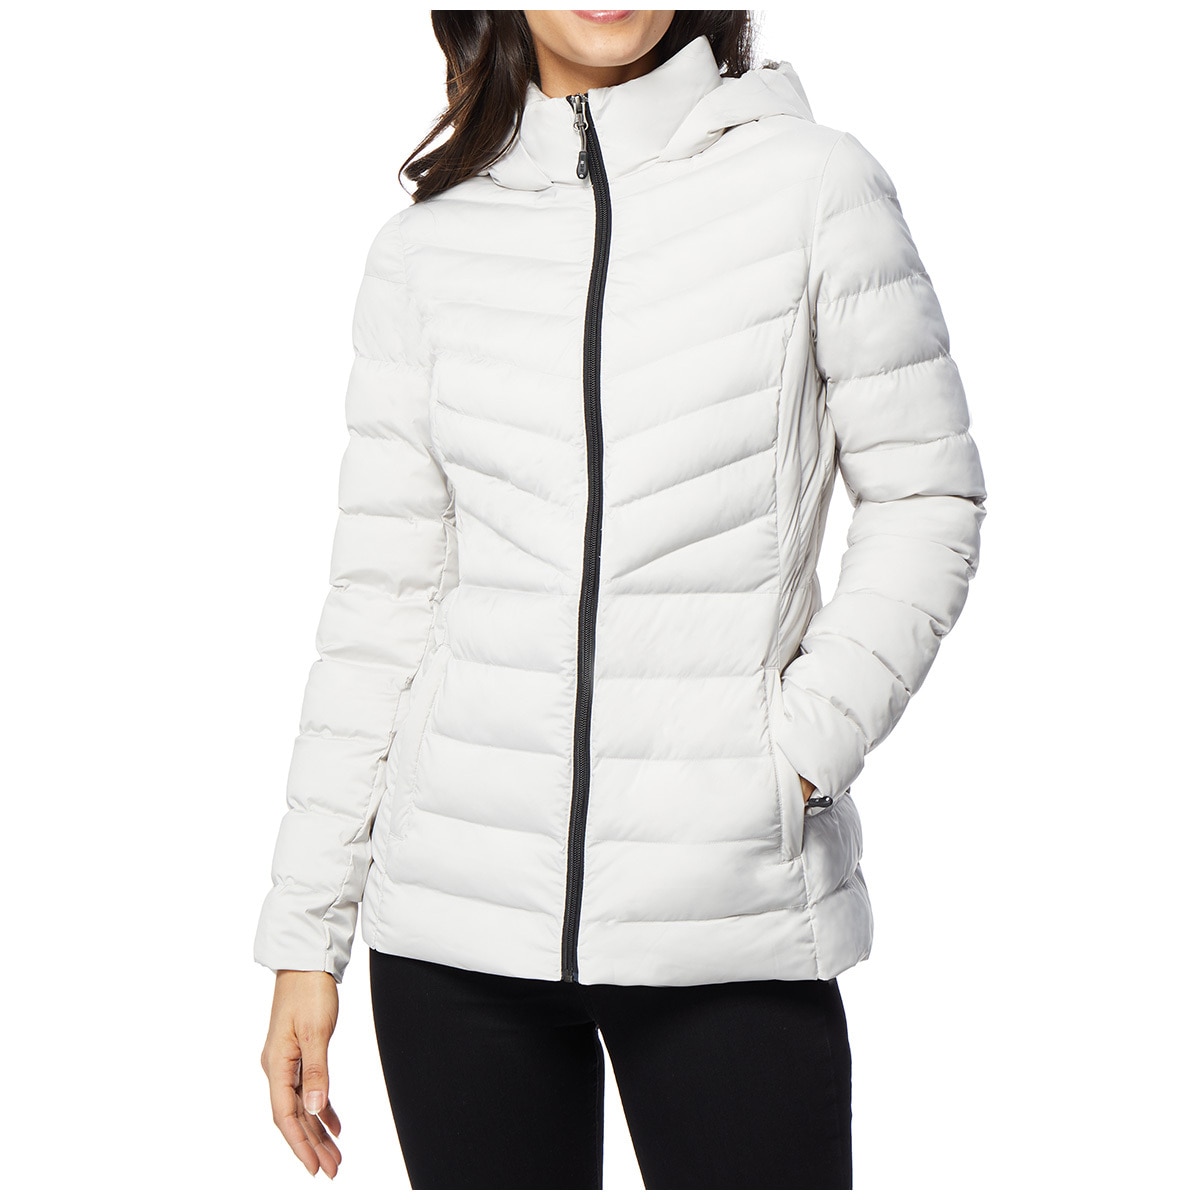 Buy 32 degrees ladies power stretch hooded jacket cheap online